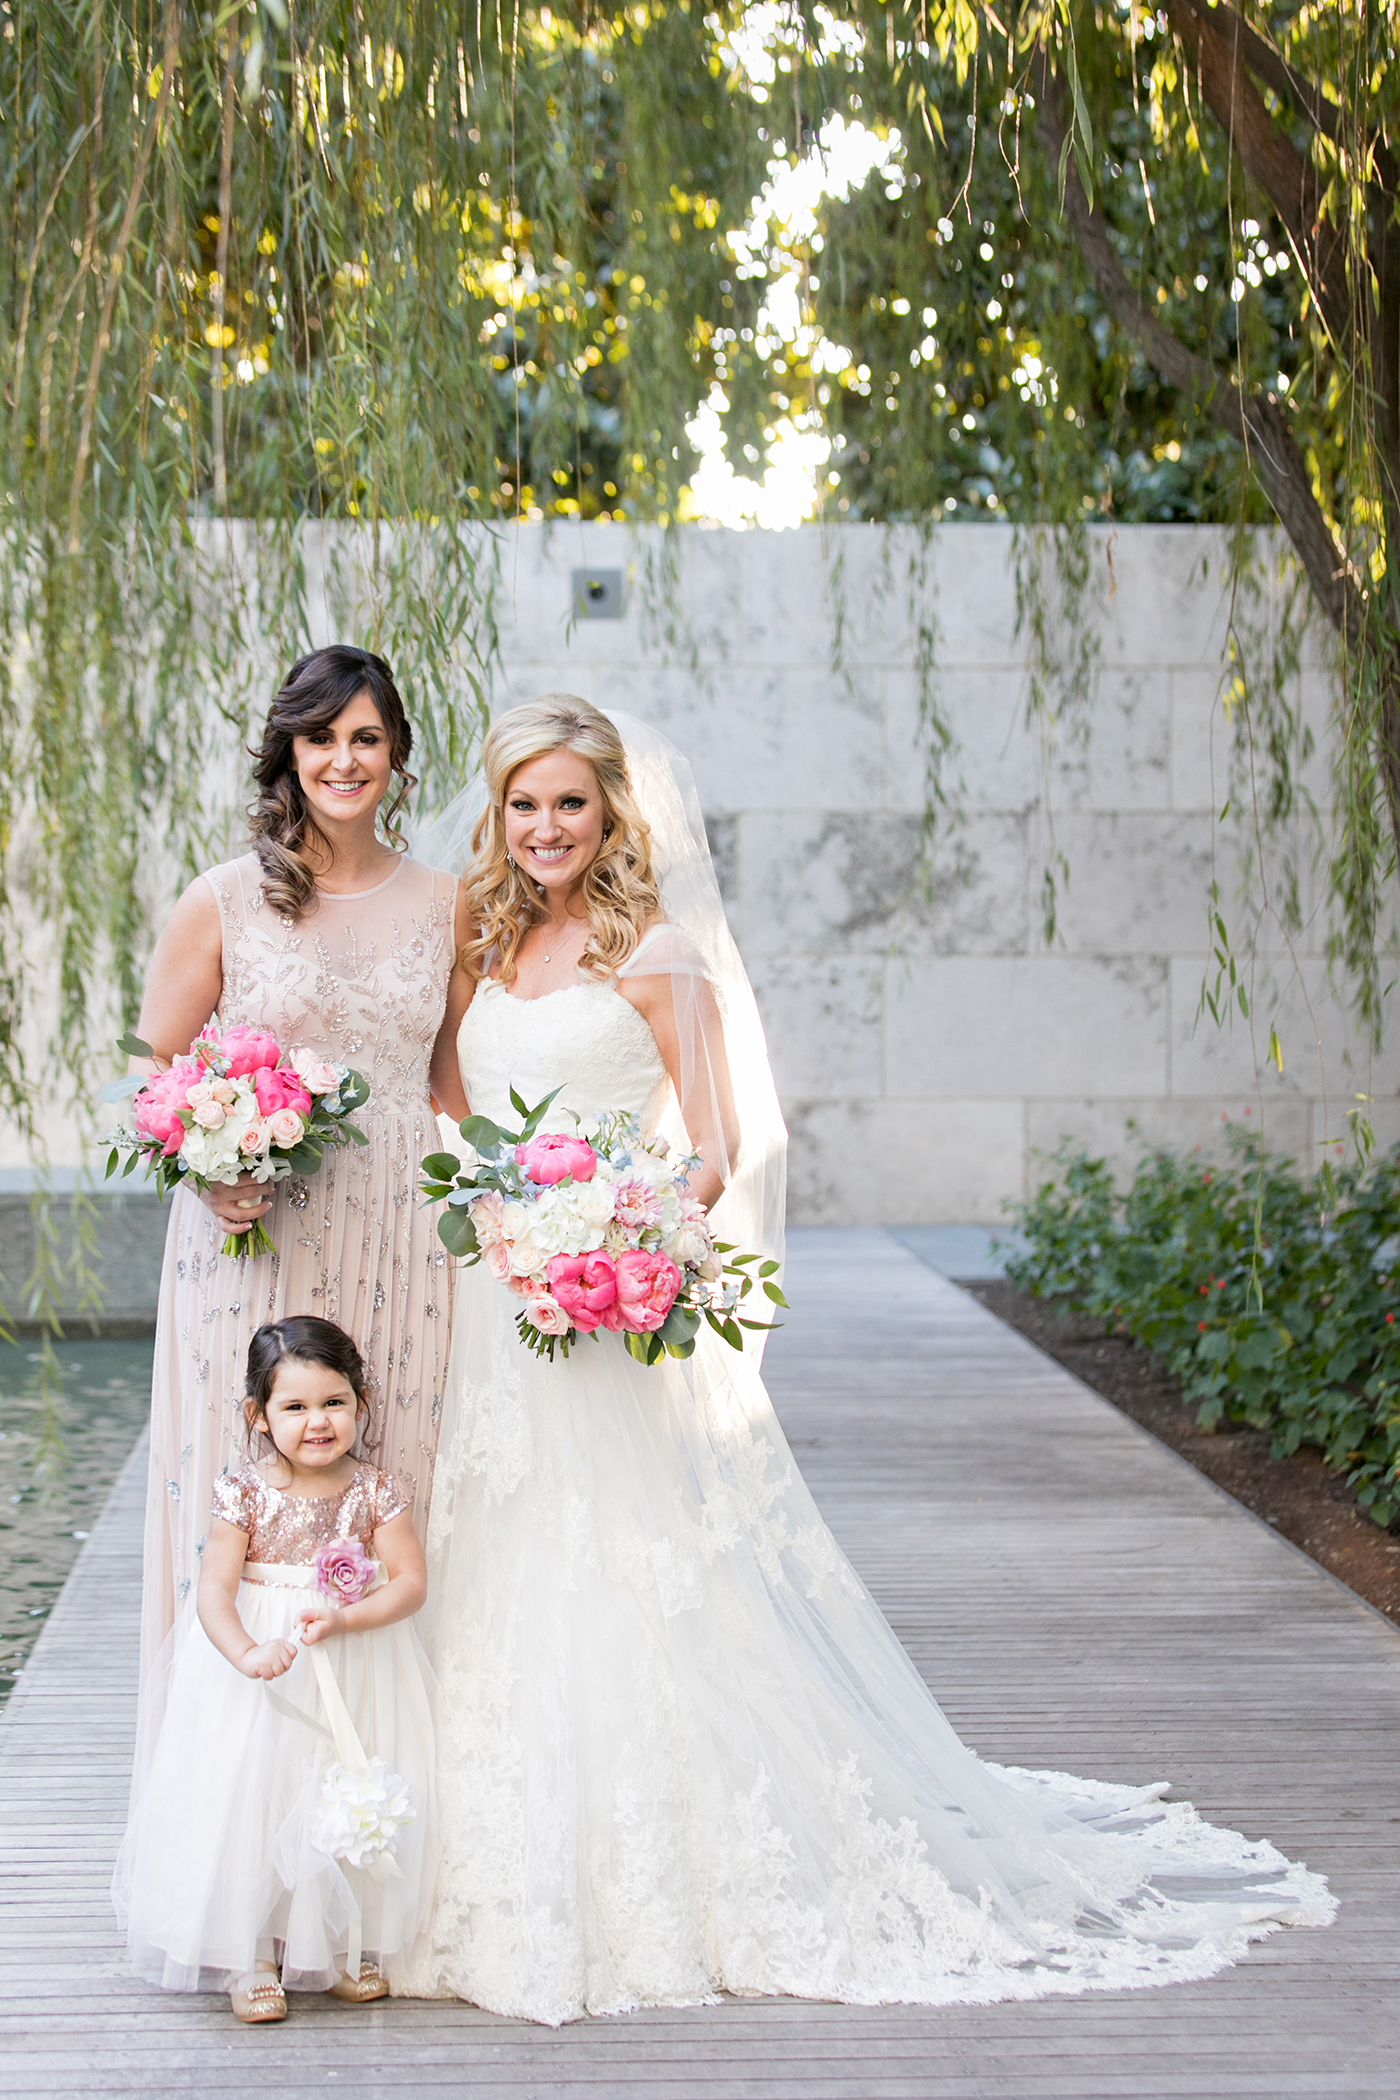 Wedding Planners in Dallas | A Stylish Soiree: Christine + Andrew